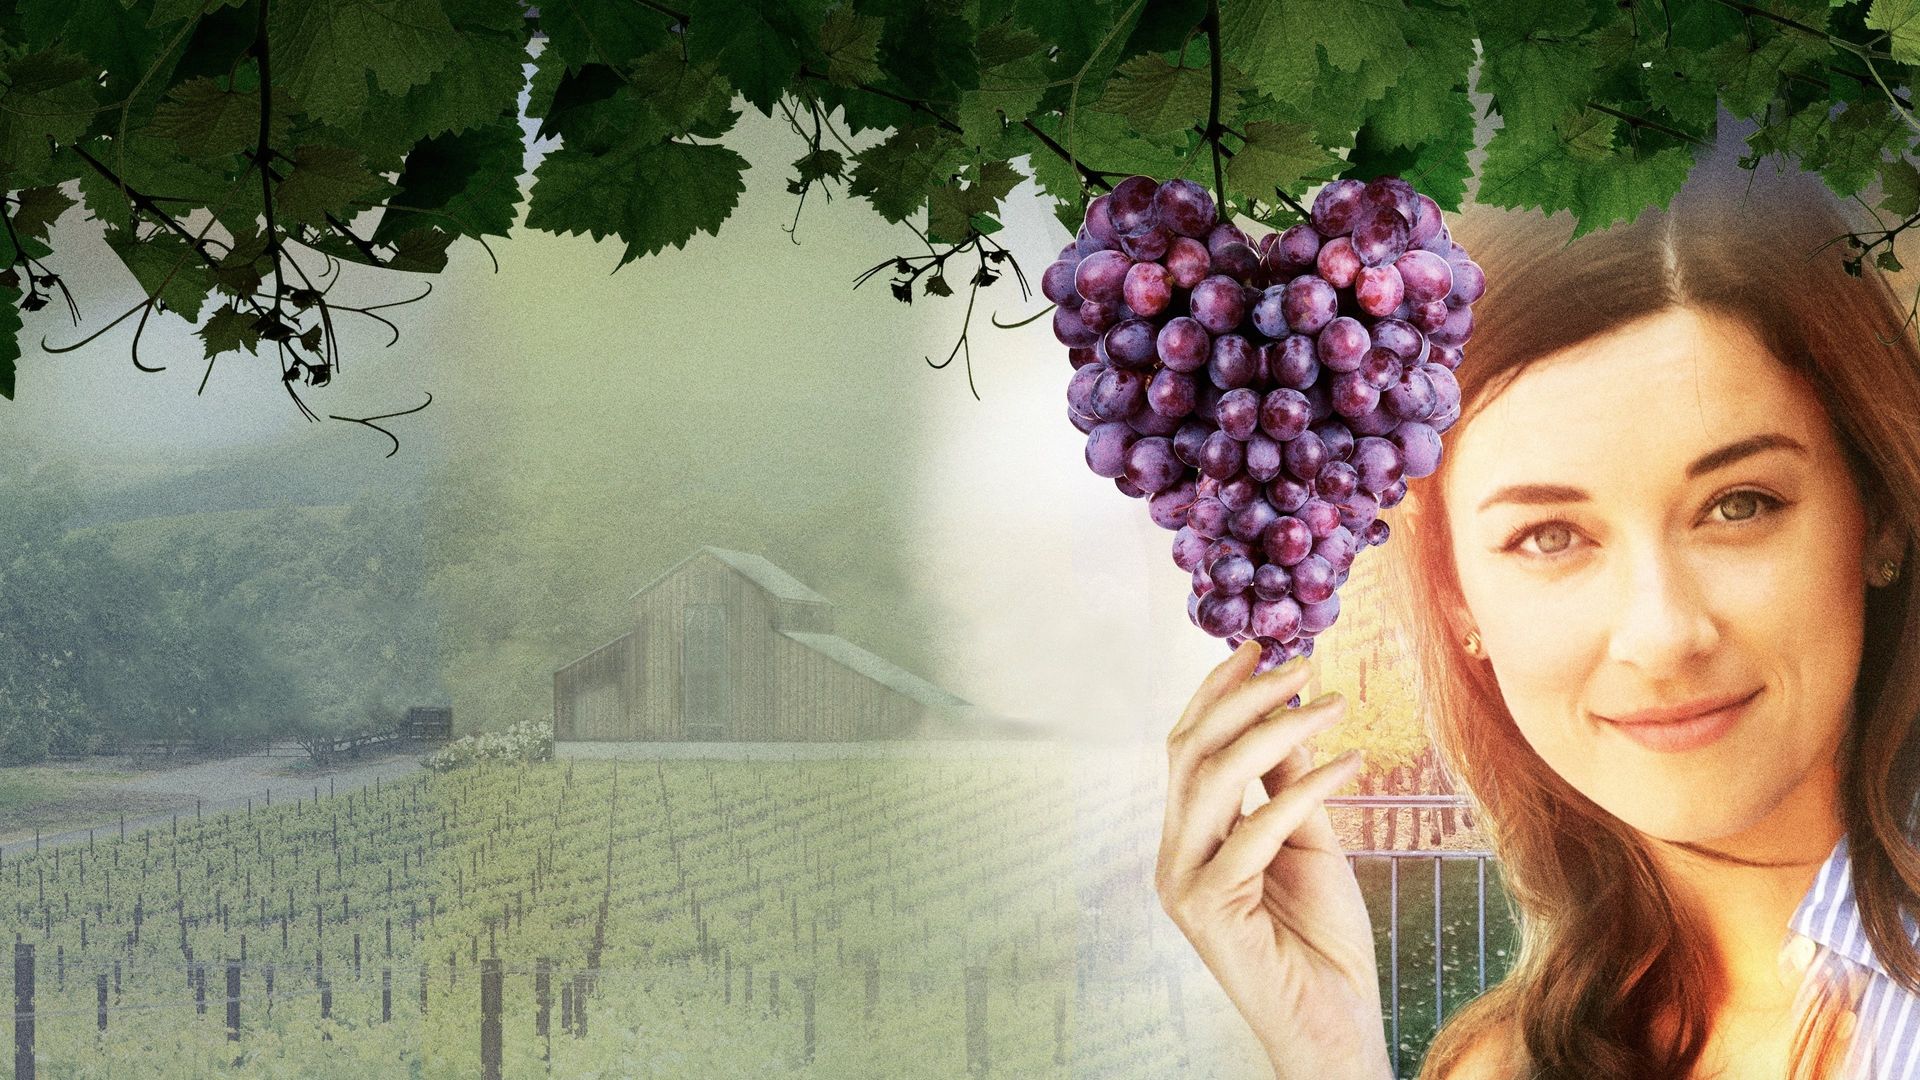 Love on the Vines background